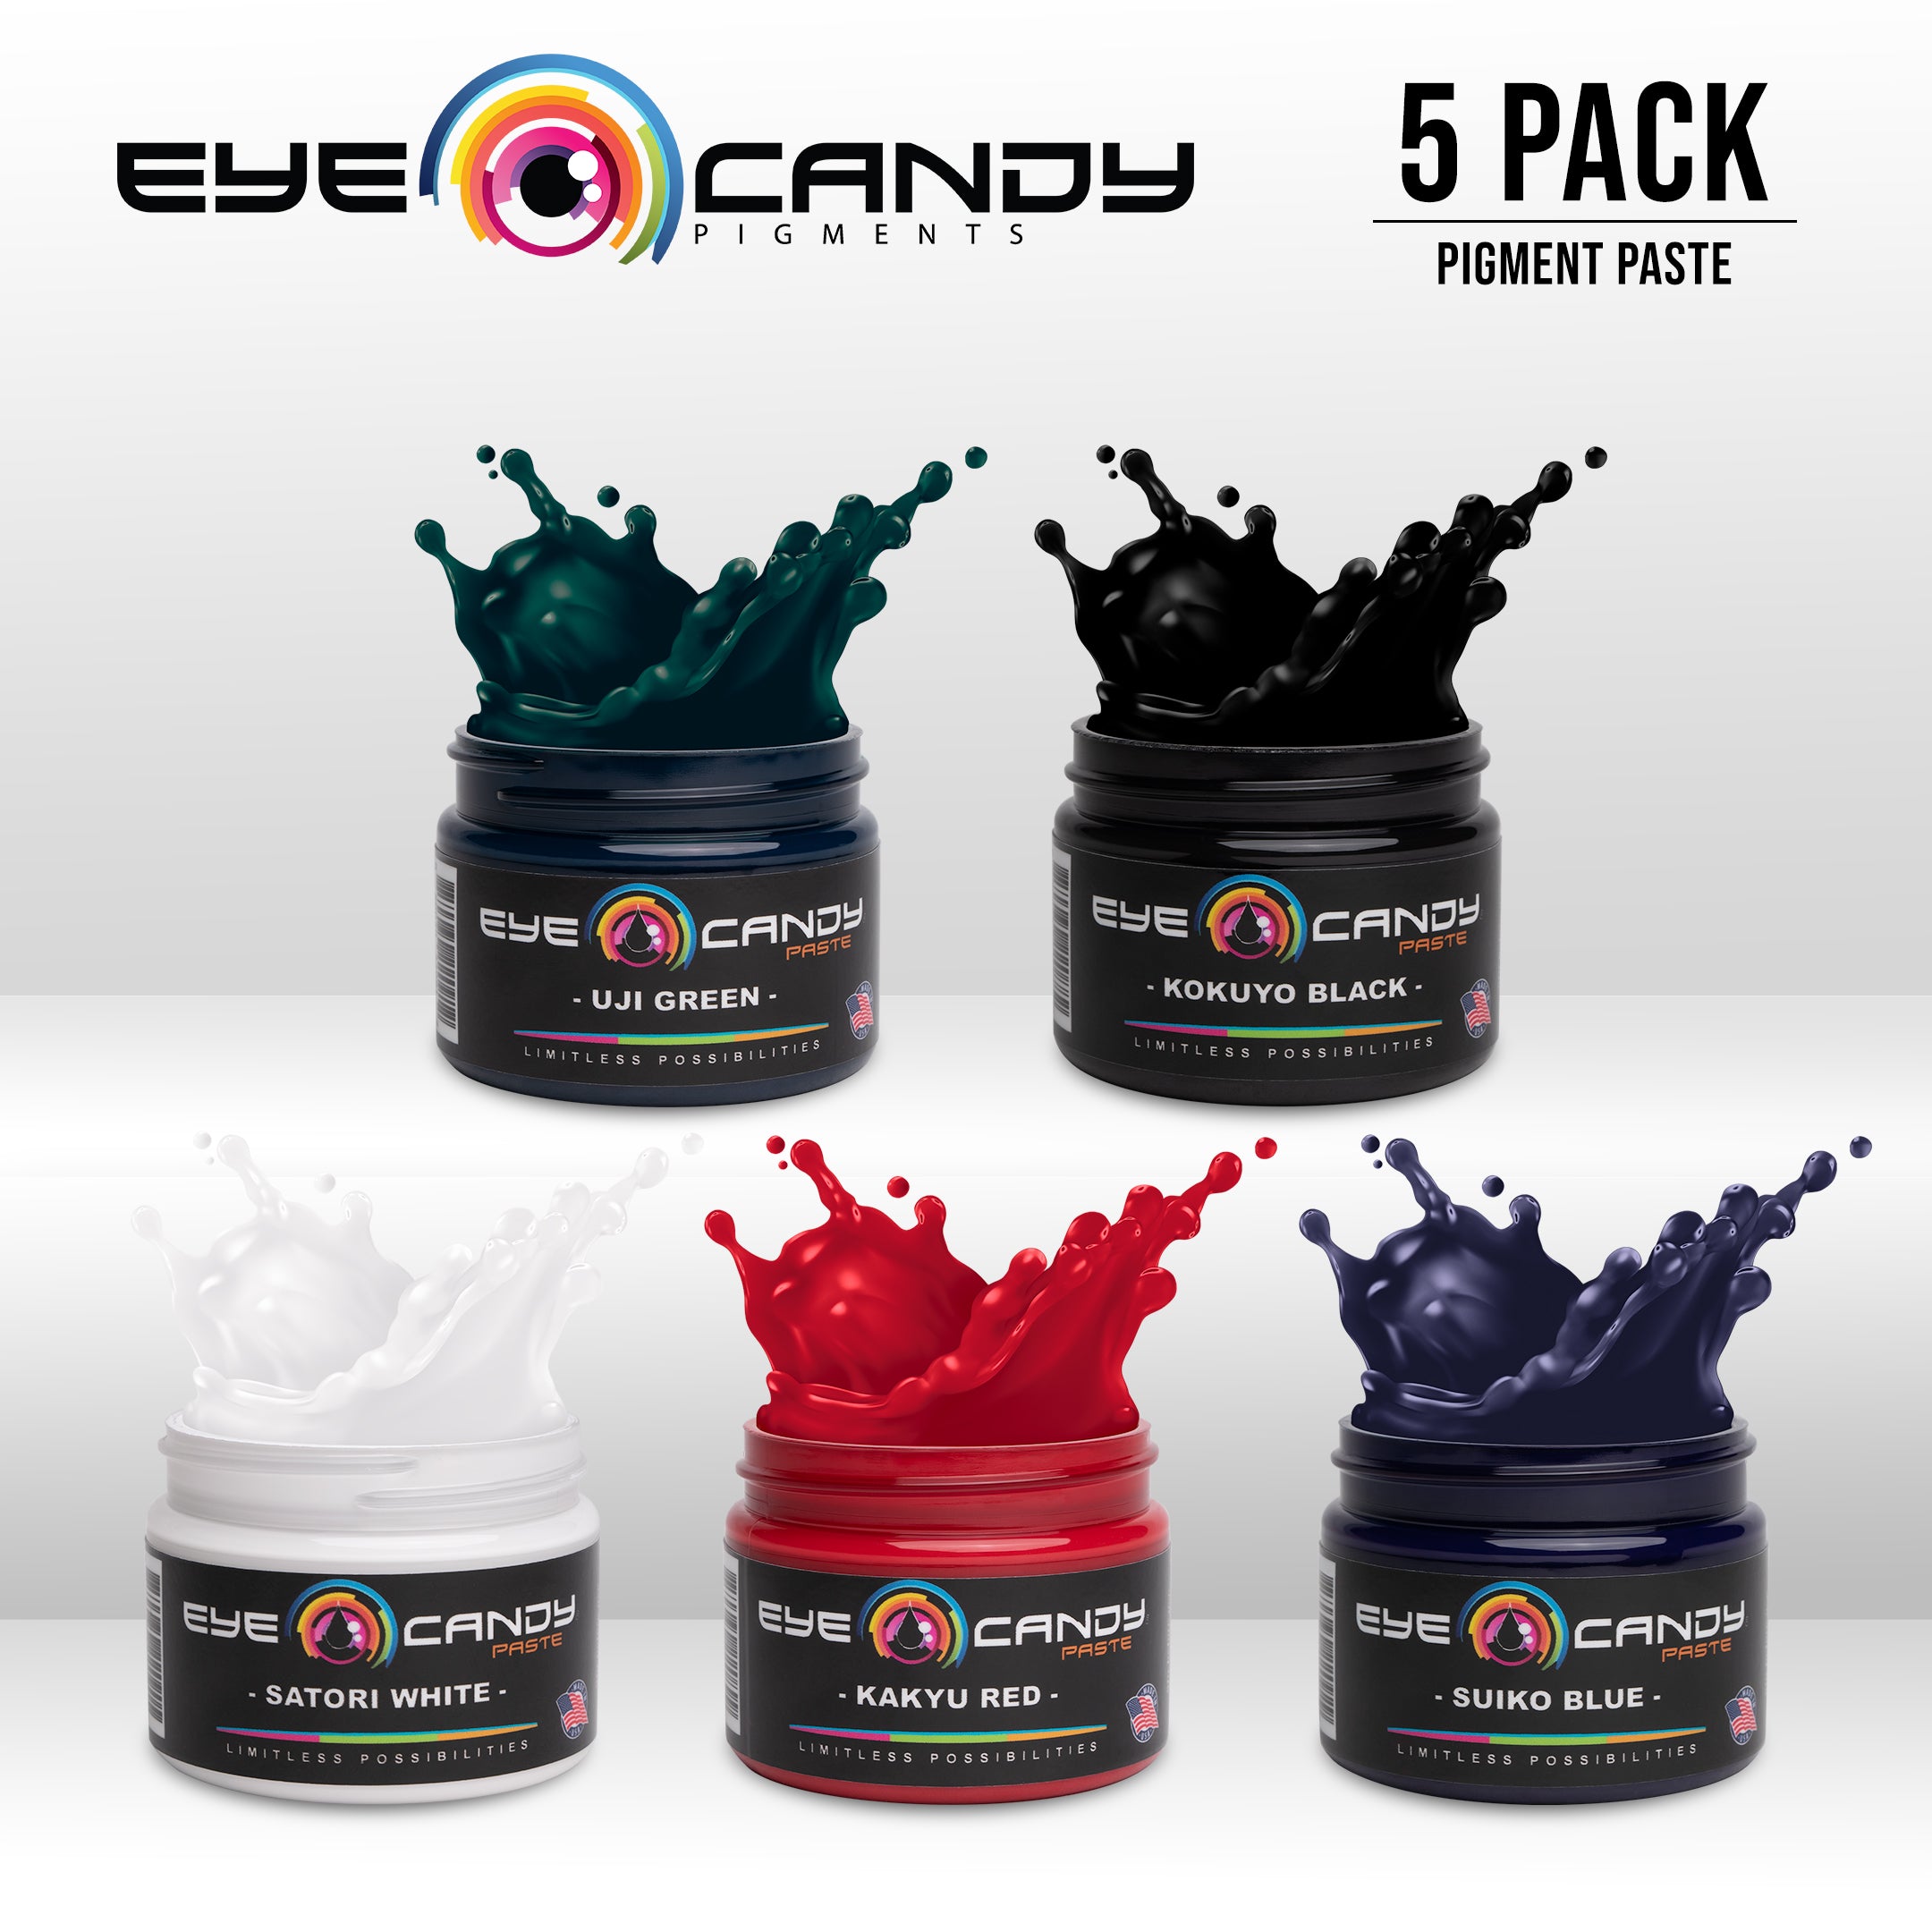 Eye Candy Pigment Paste  Multipurpose DIY Arts and Crafts Additive, Epoxy, Resin Art Paste, Highly Pigmented, Woodworking